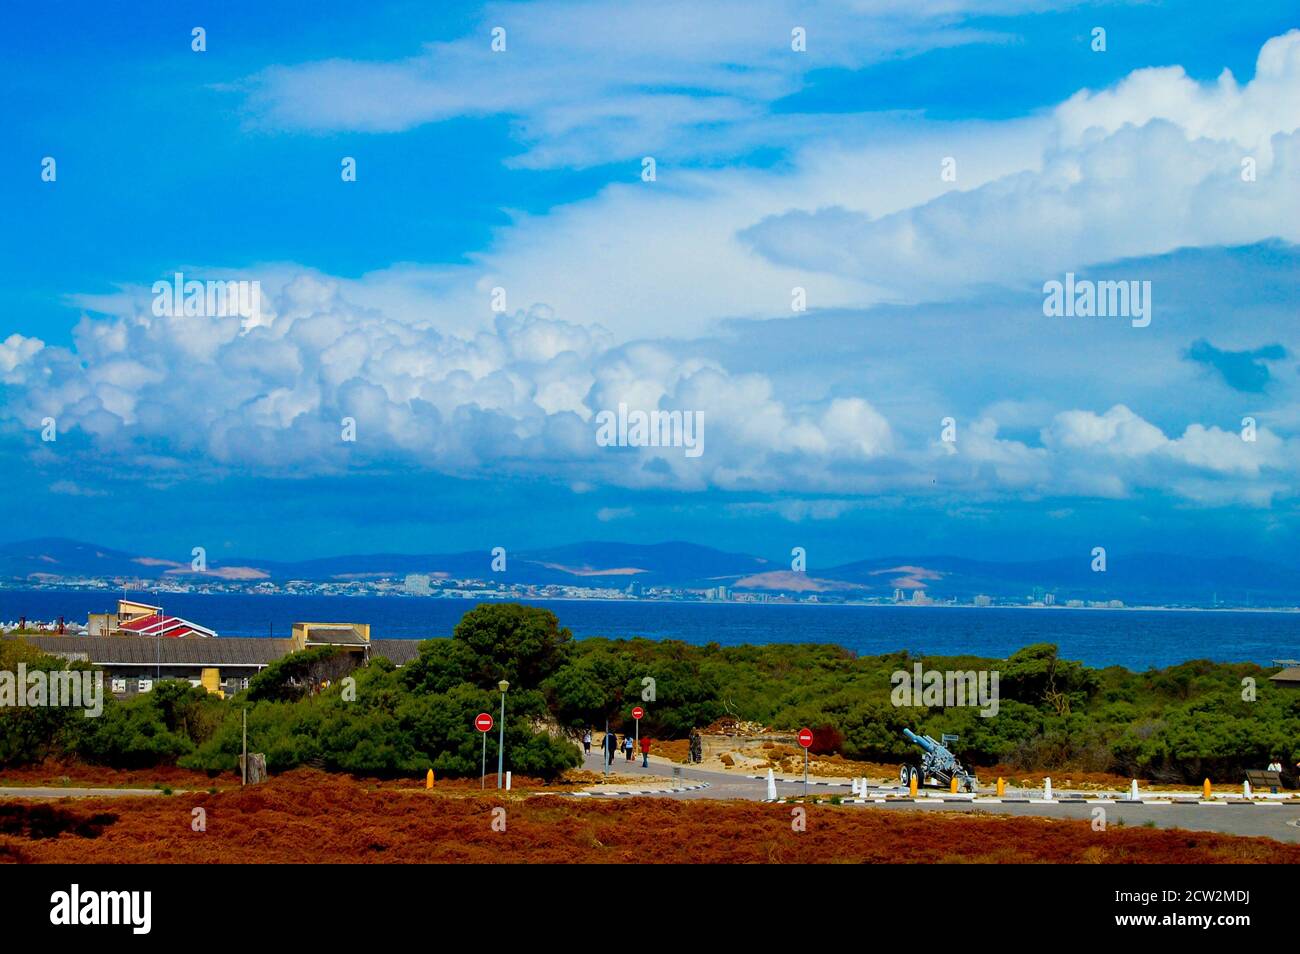 Prison on Robben Island - Cape Town - South Africa Stock Photo